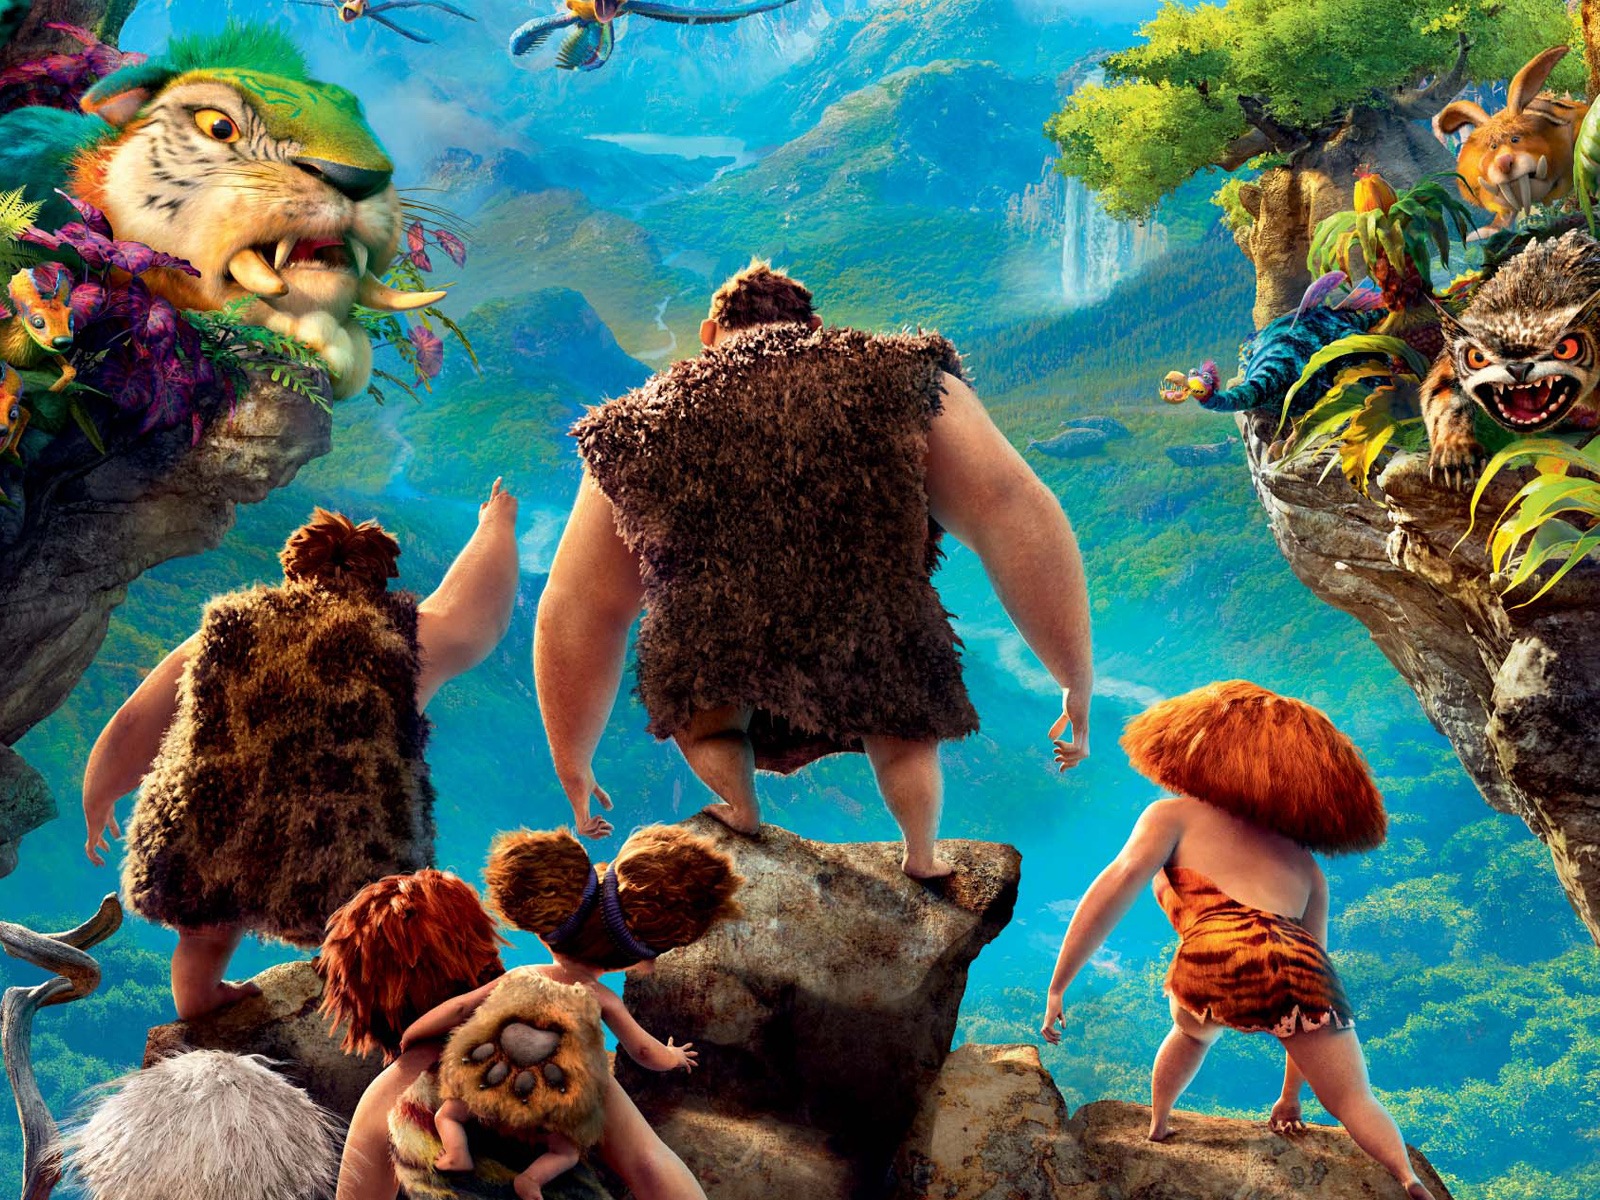 The Croods HD movie wallpapers #5 - 1600x1200